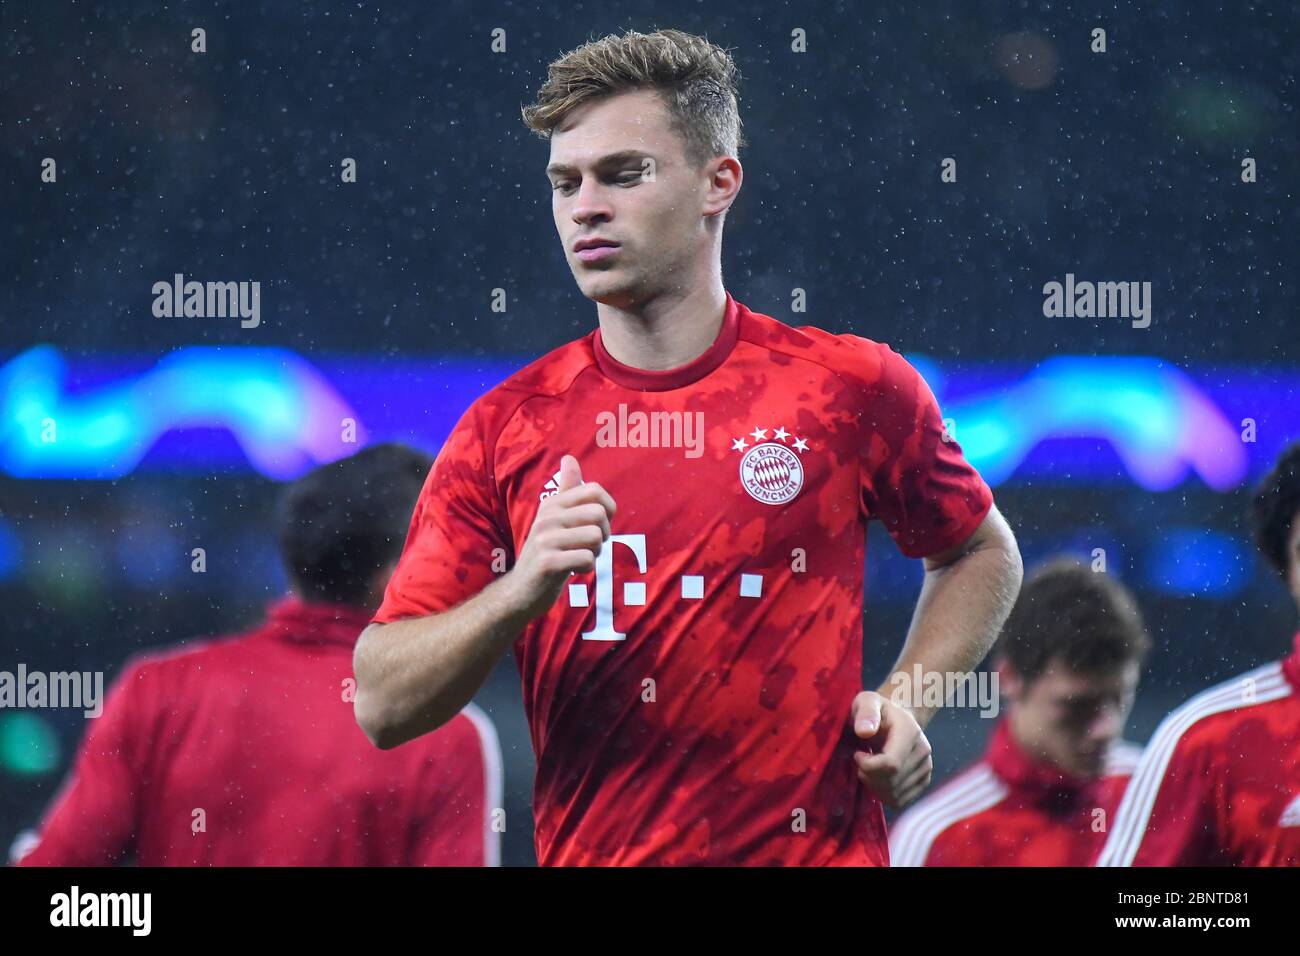 LONDON, ENGLAND - OCTOBER 1, 2019: Joshua Kimmich of Bayern pictured ahead of the 2019/20 UEFA Champions League Group B game between Tottenham Hotspur FC (England) and Bayern Munchen (Germany) at Tottenham Hotspur Stadium. Stock Photo